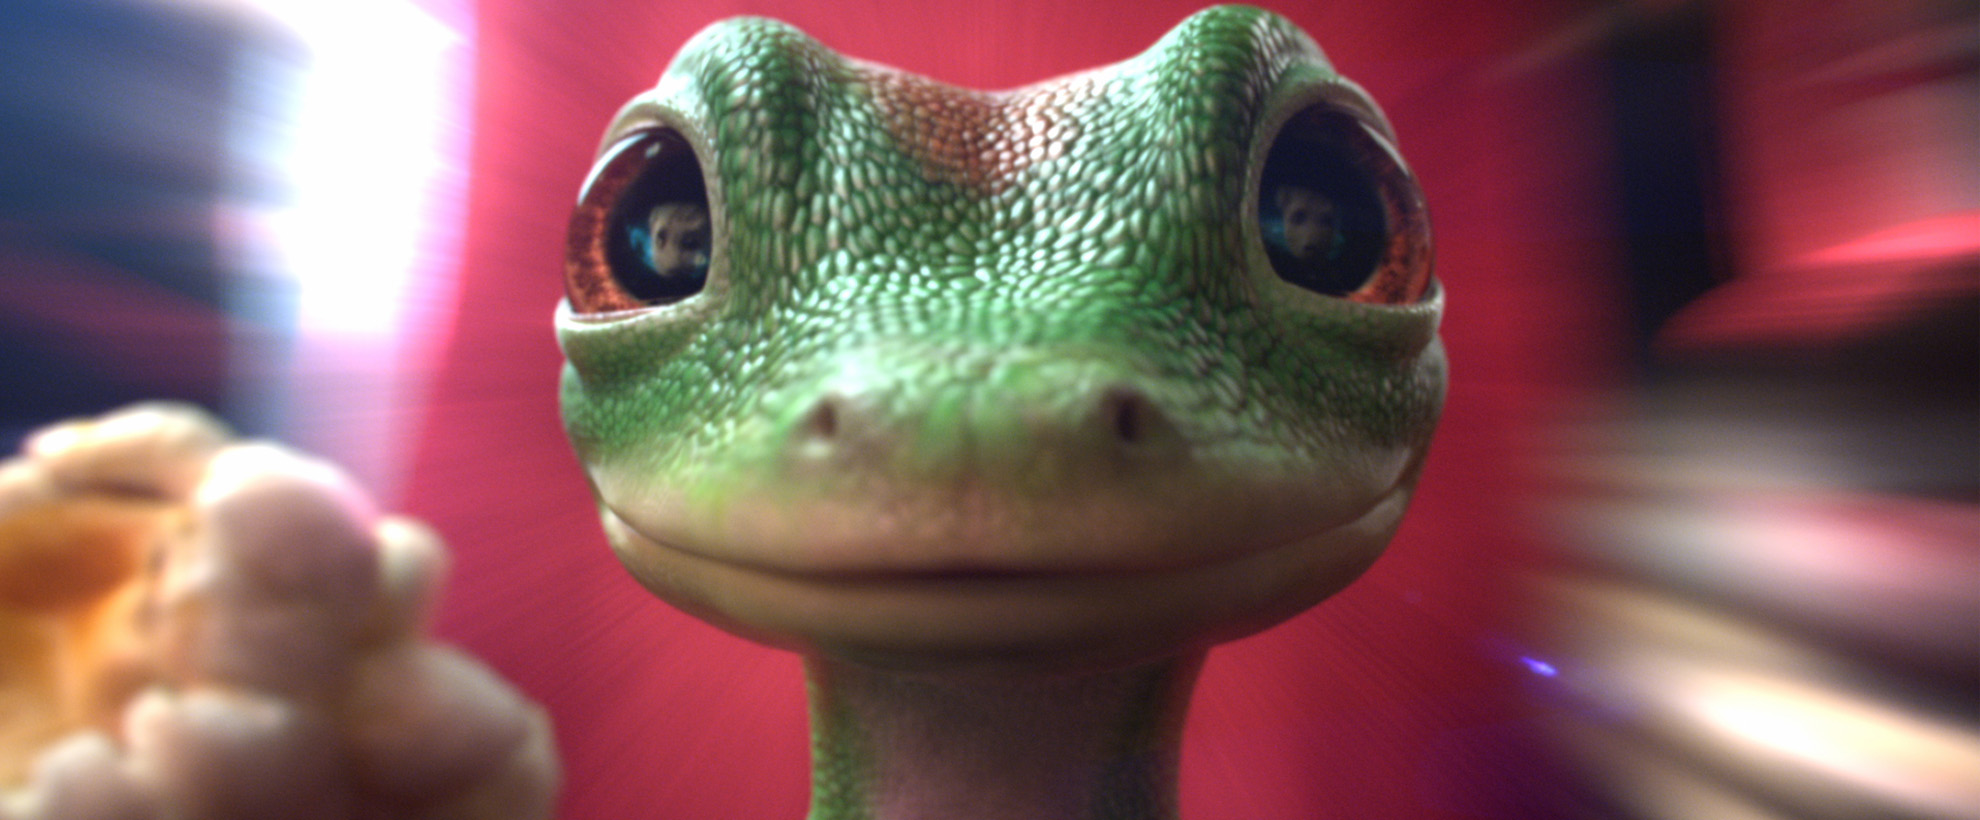 The GEICO gecko stood facing us with a motion blurred red background.